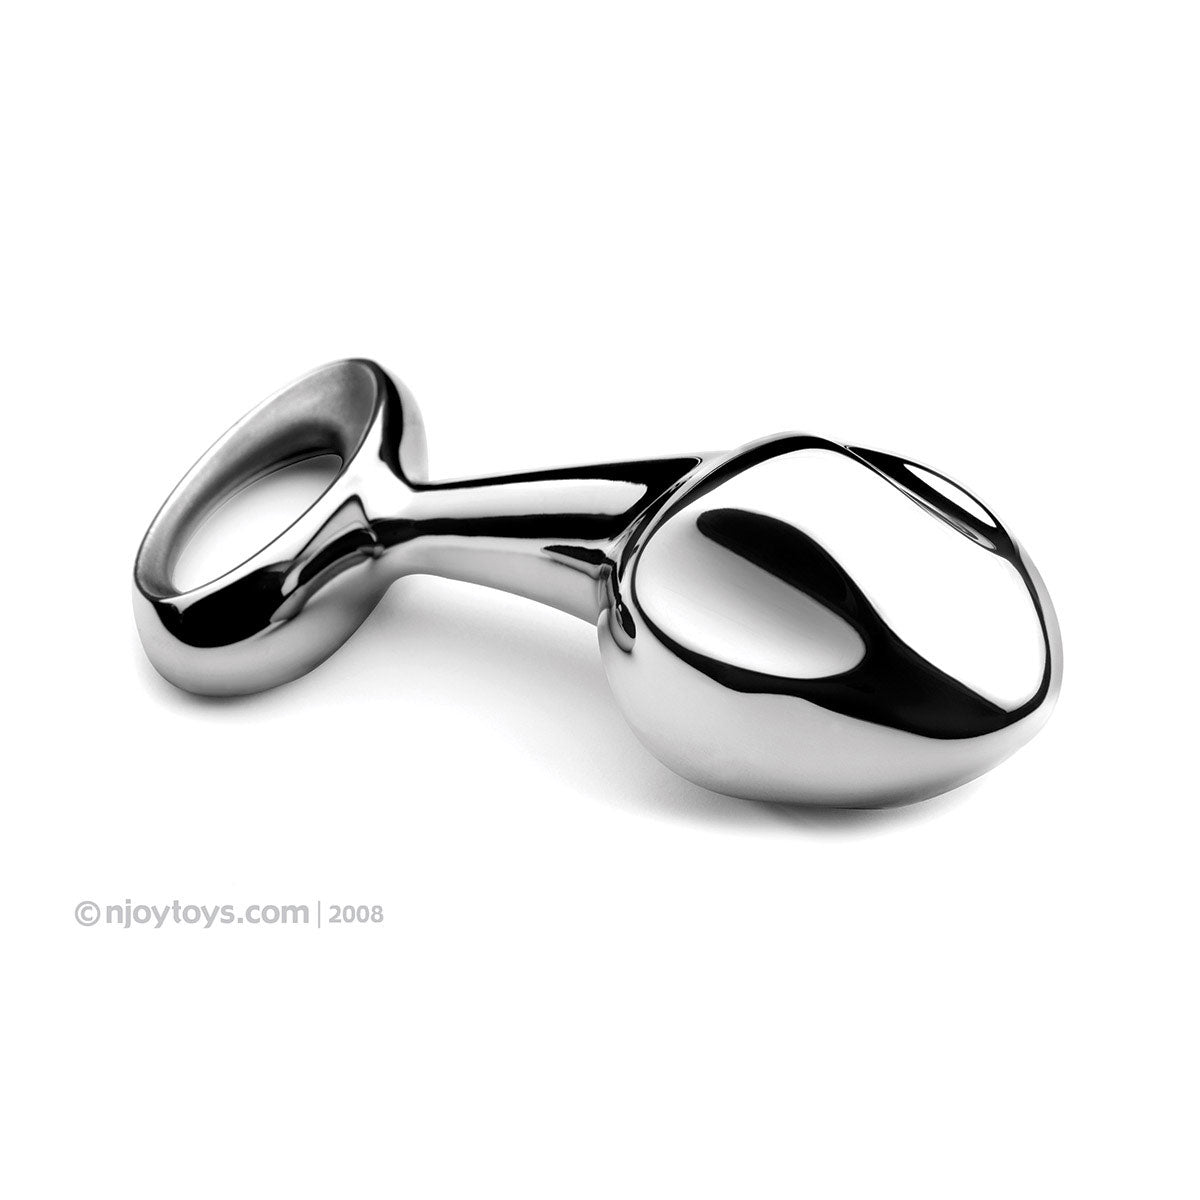 njoy Pure Stainless Steel Butt Plug 2.0 XL